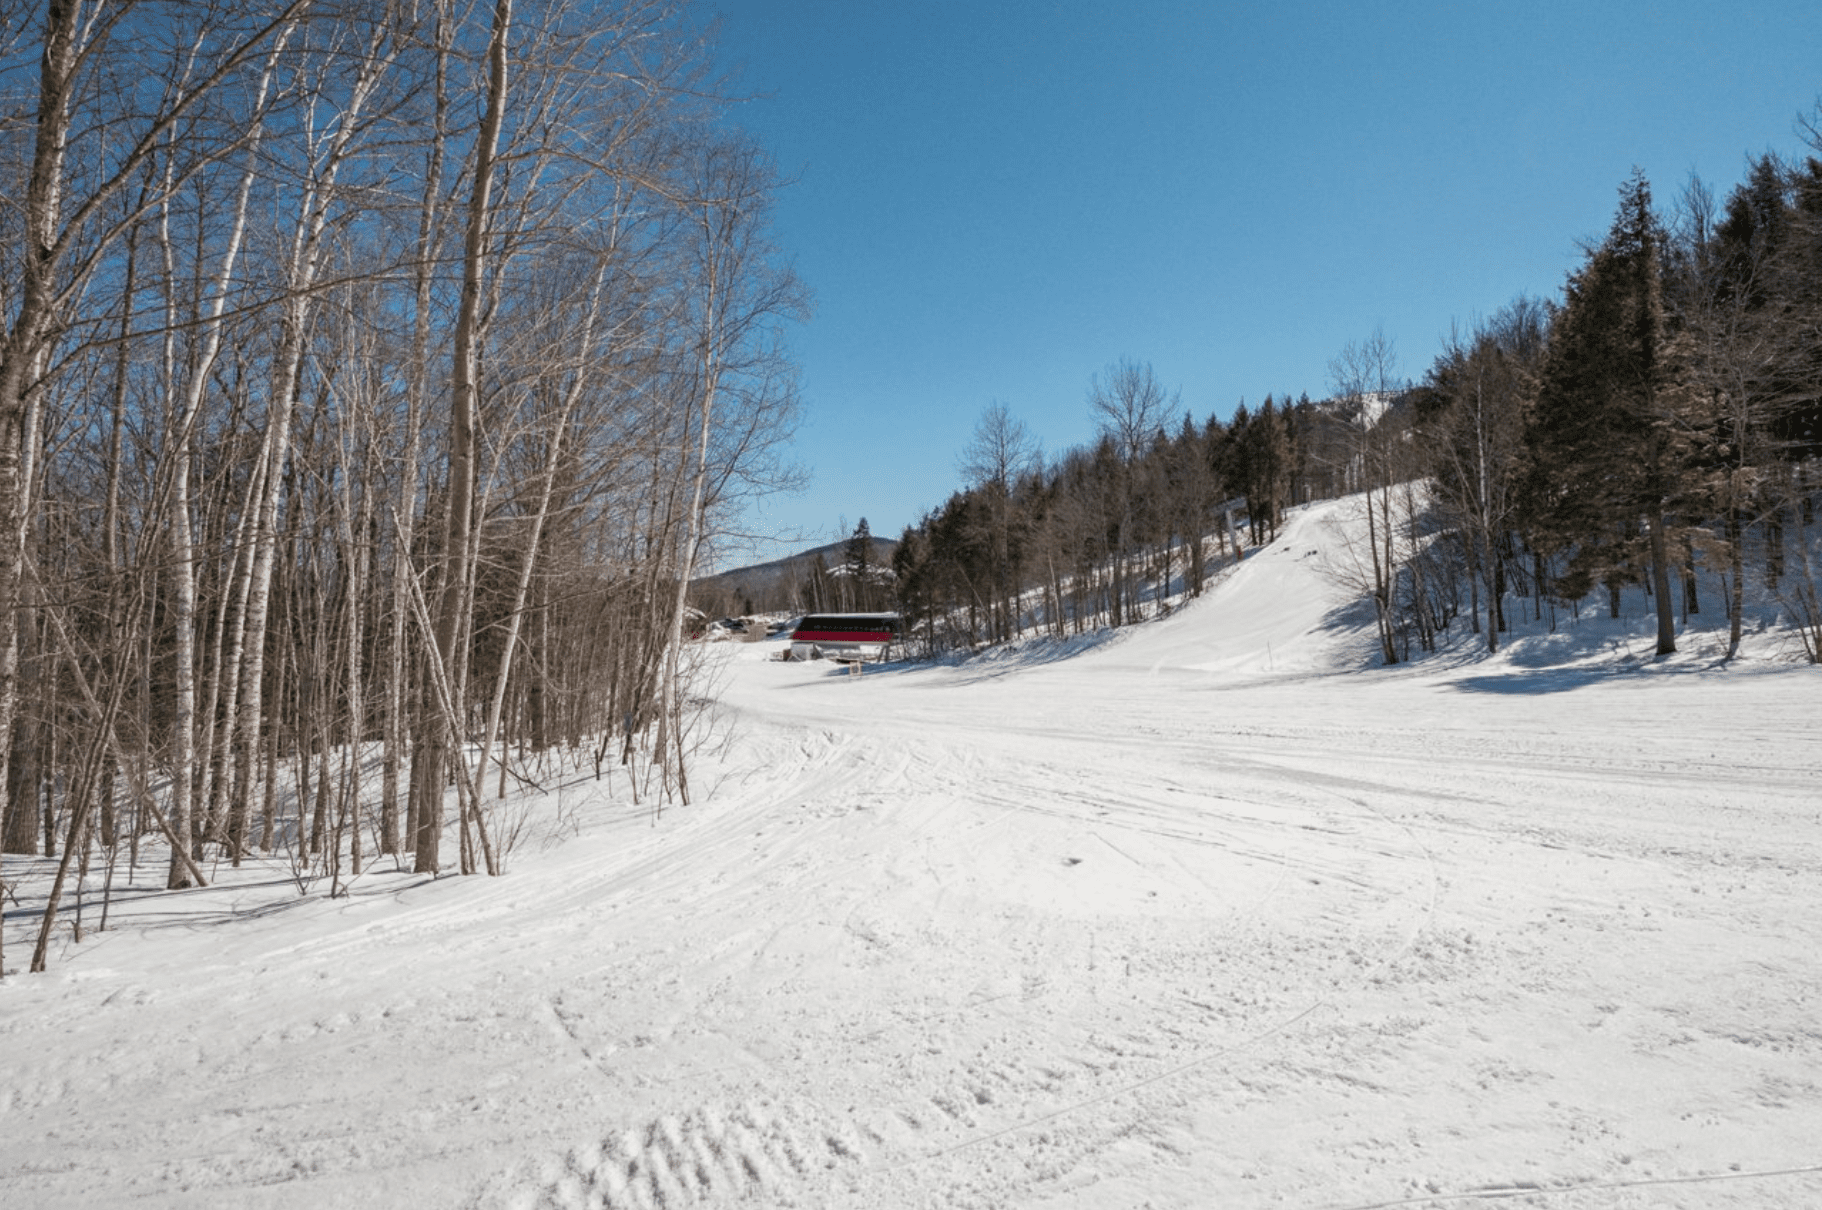 For Sale: New Slopeside Condos at Sunday River